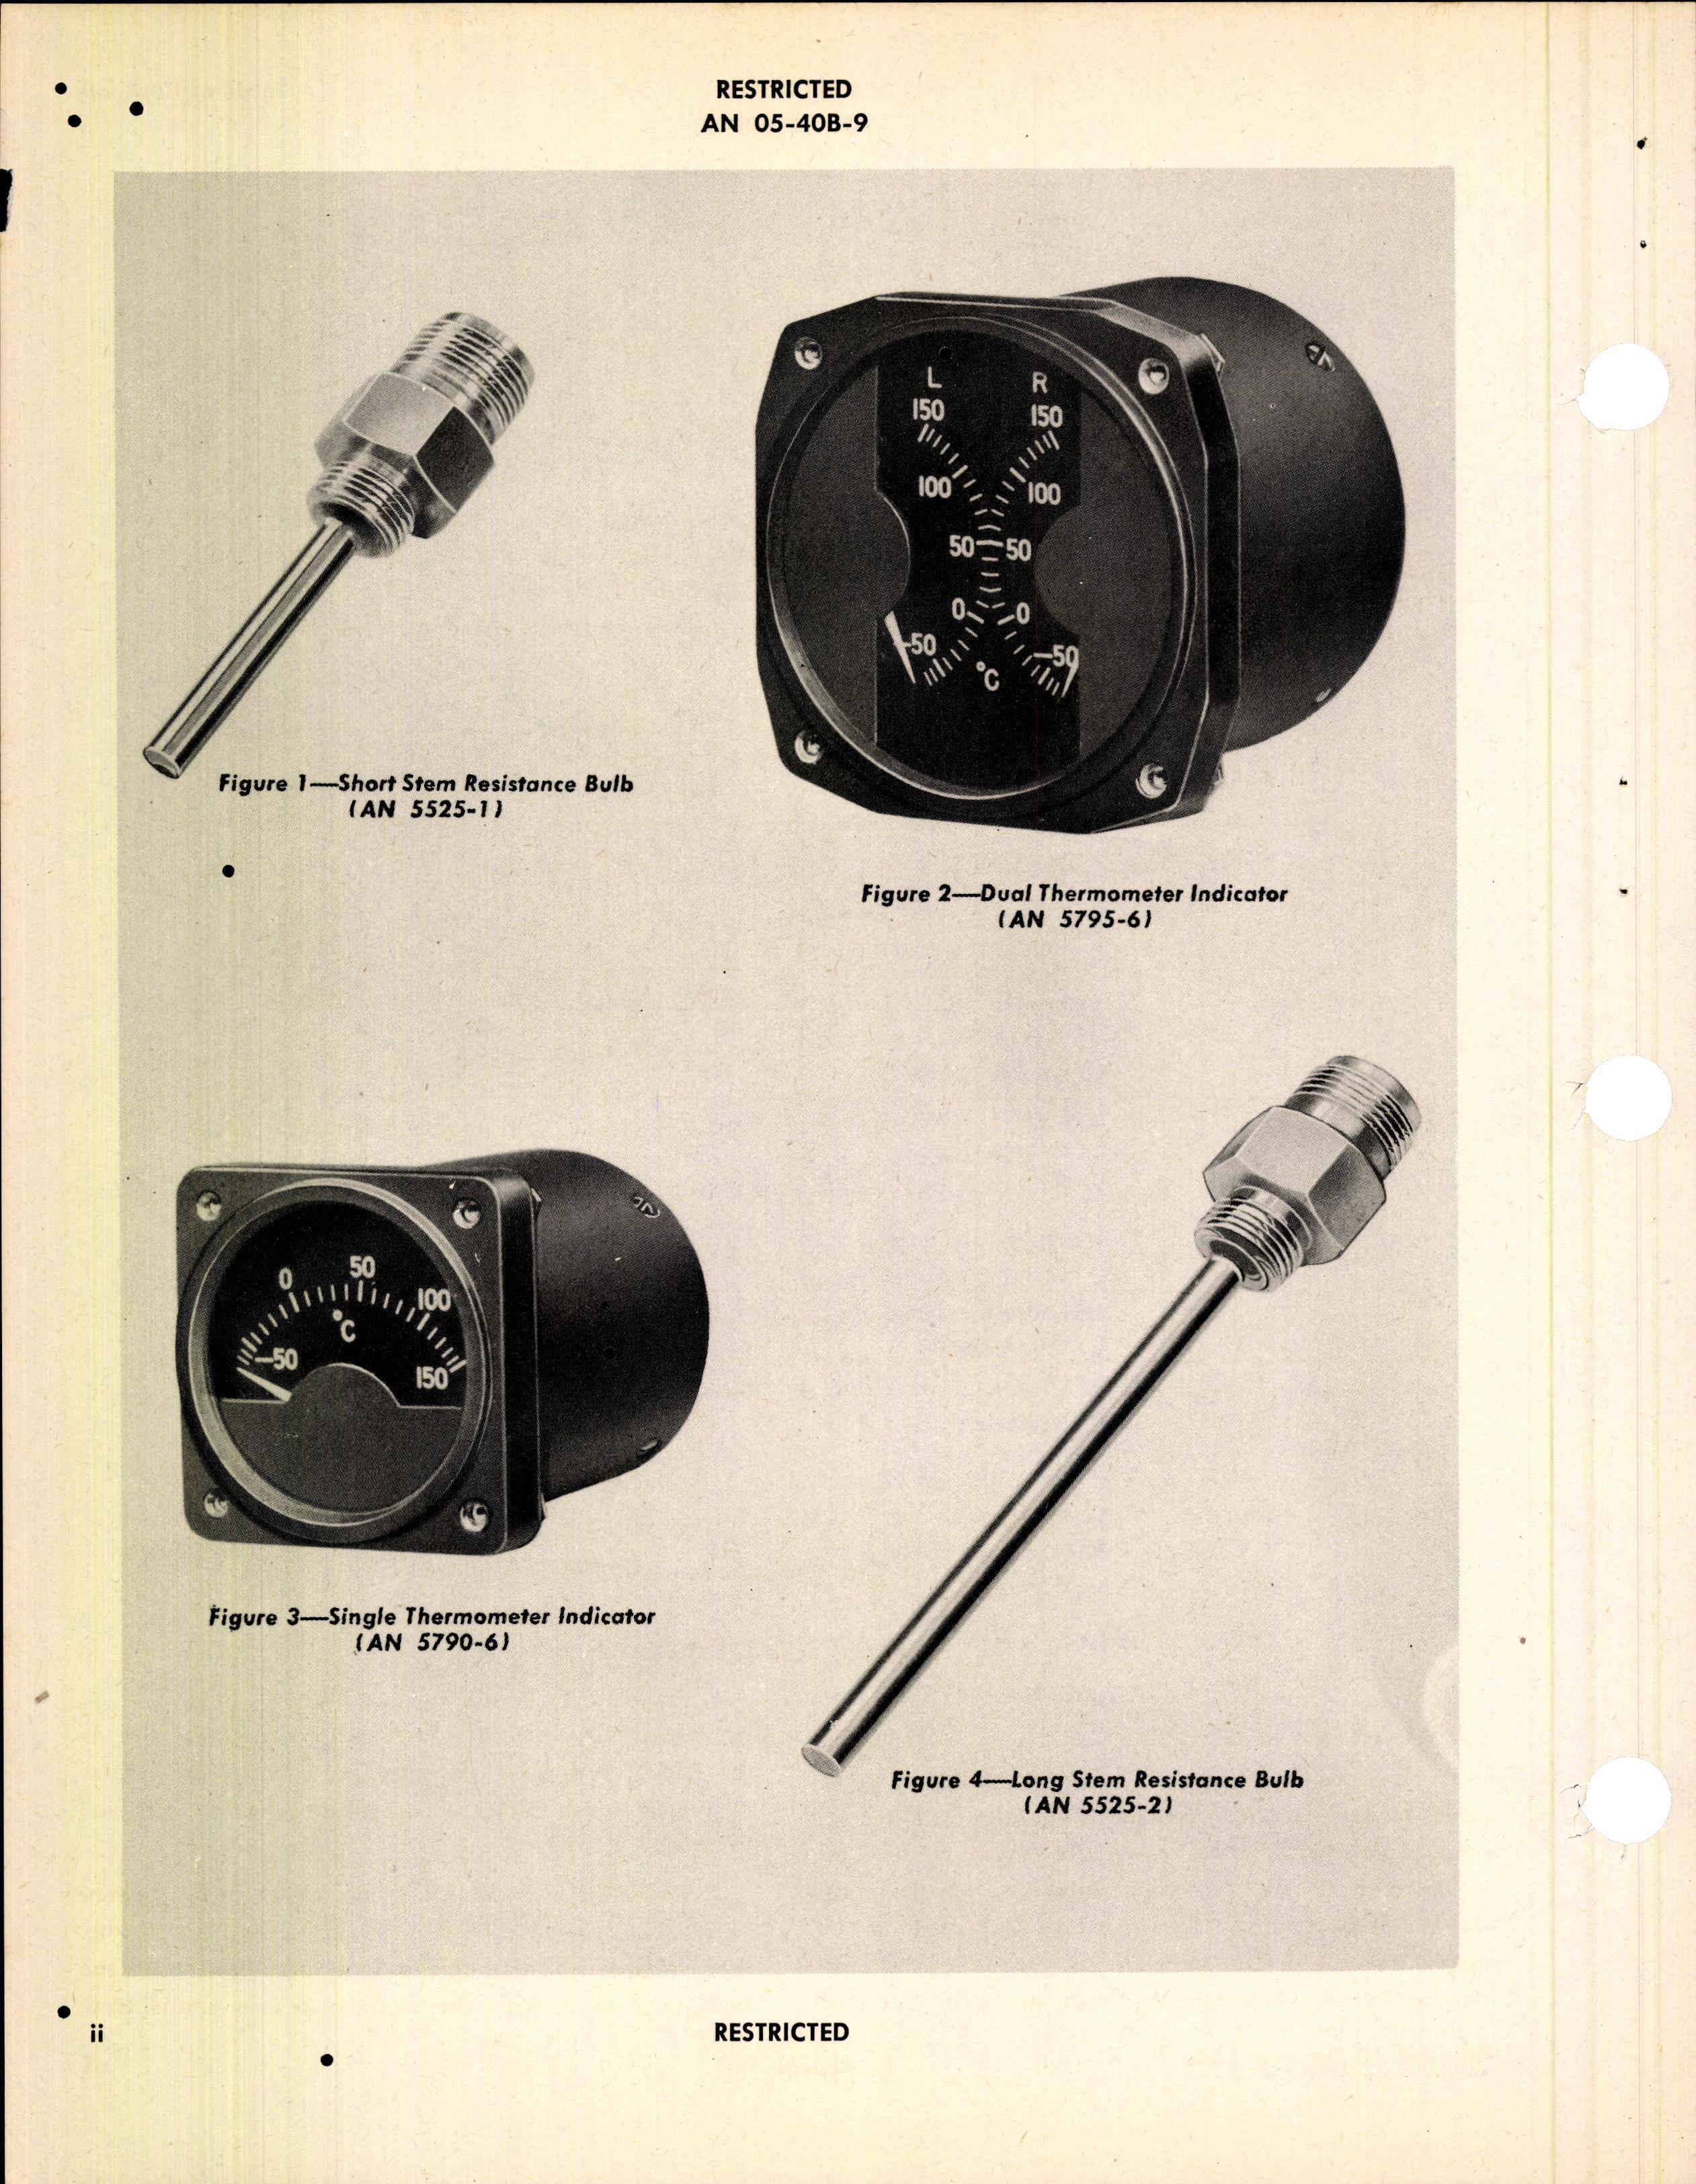 Sample page 6 from AirCorps Library document: Operation, Service, & Overhaul Instructions with Parts Catalog for Thermometer Indicators